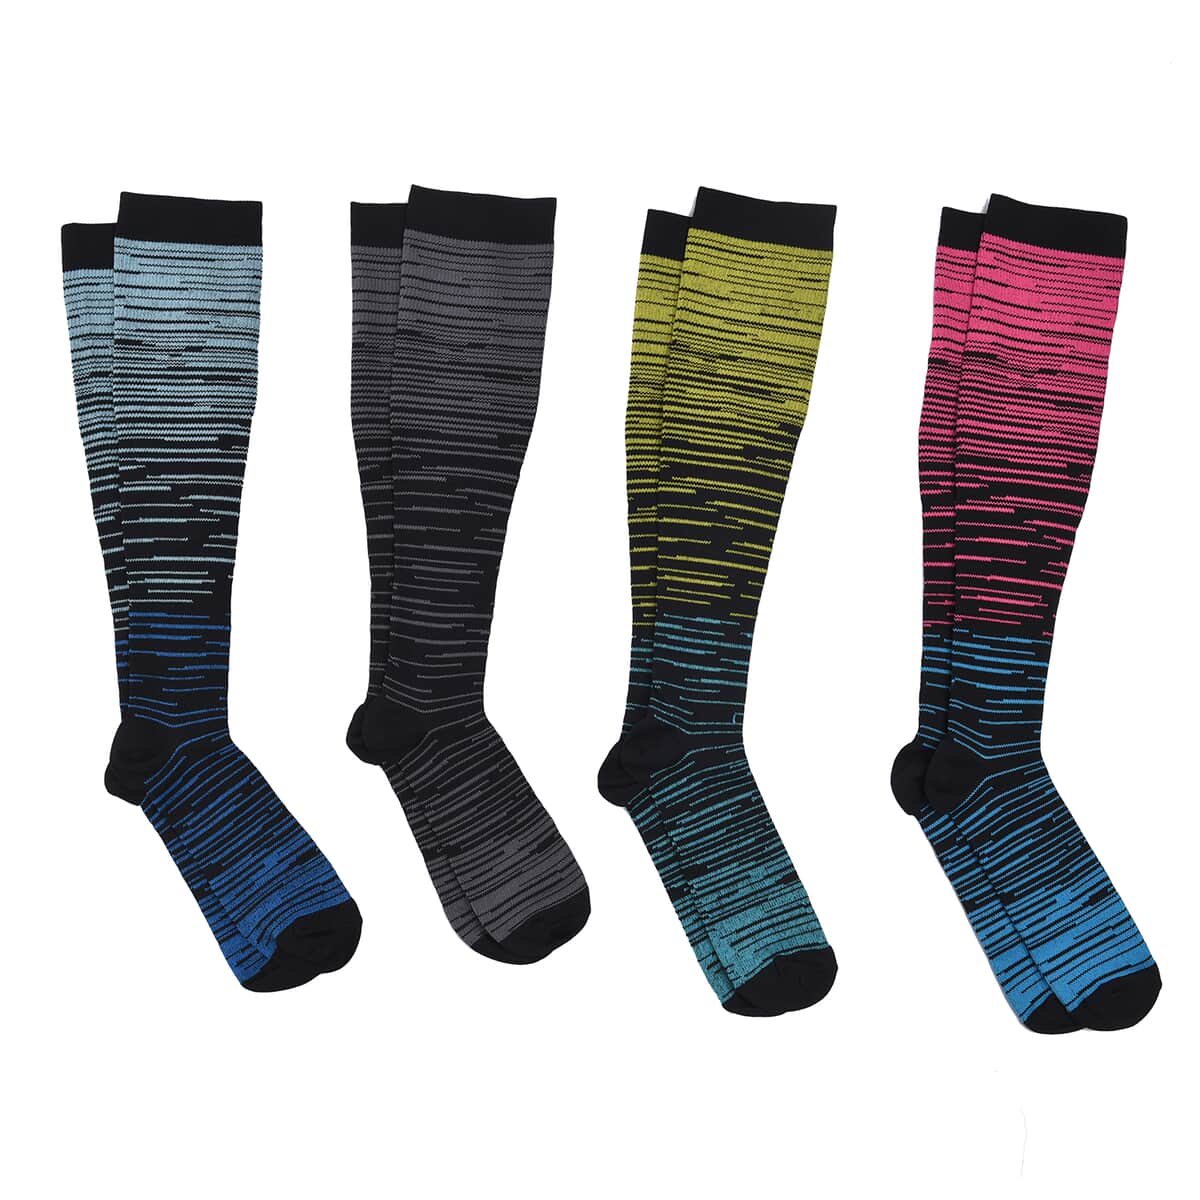 Set of 4 Pairs Knee Length Copper Infused Compression Socks - Multi Stripe (L/XL) image number 0